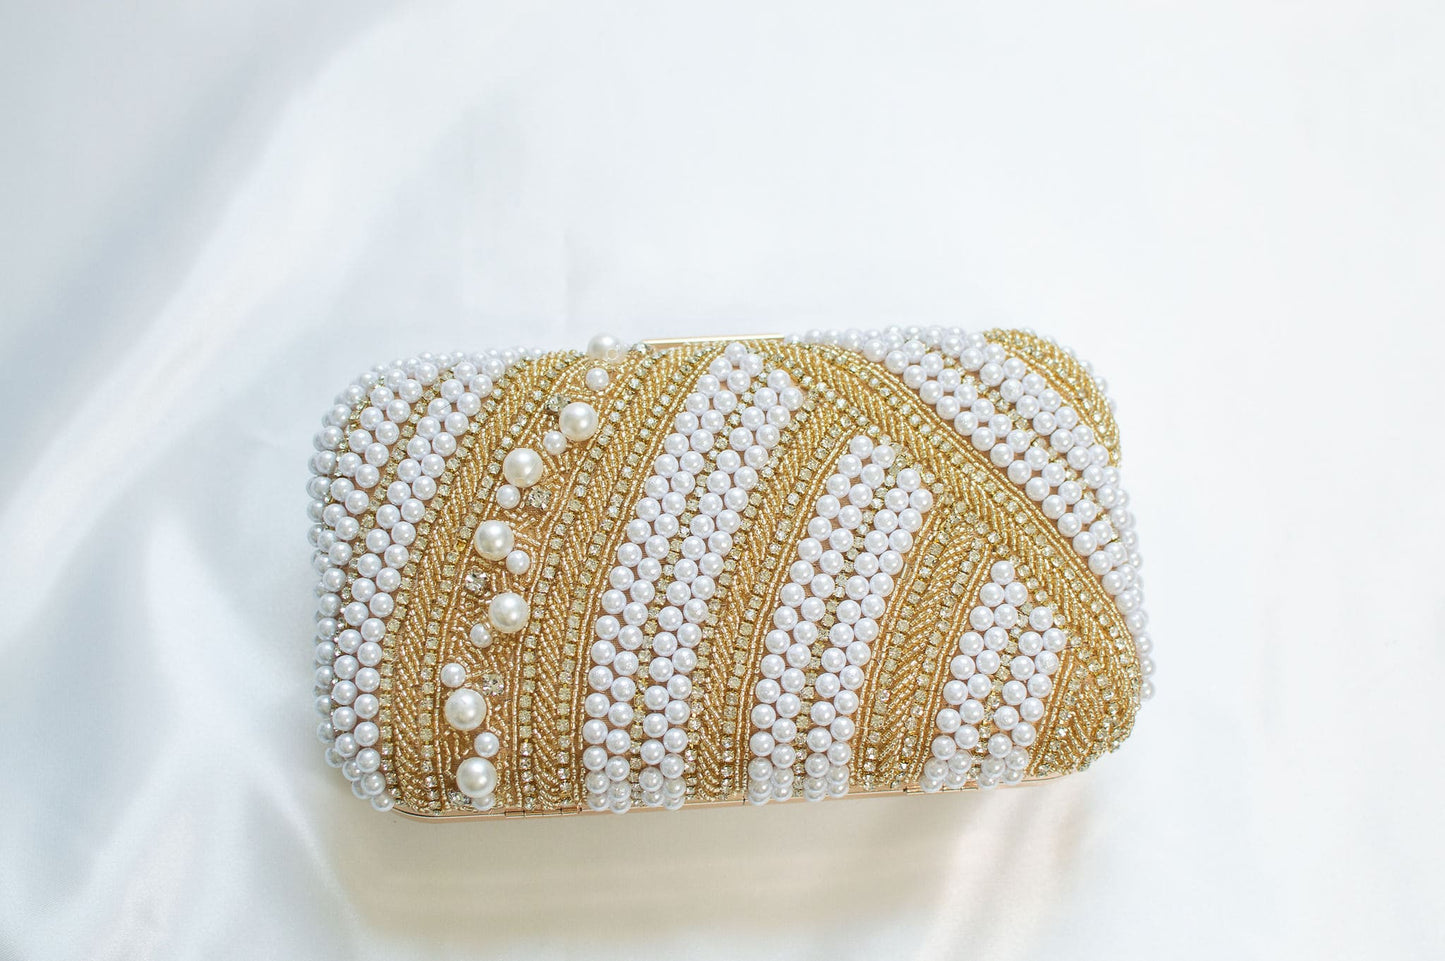 Gold and White Clutch - Women's pearl evening bag for bridal